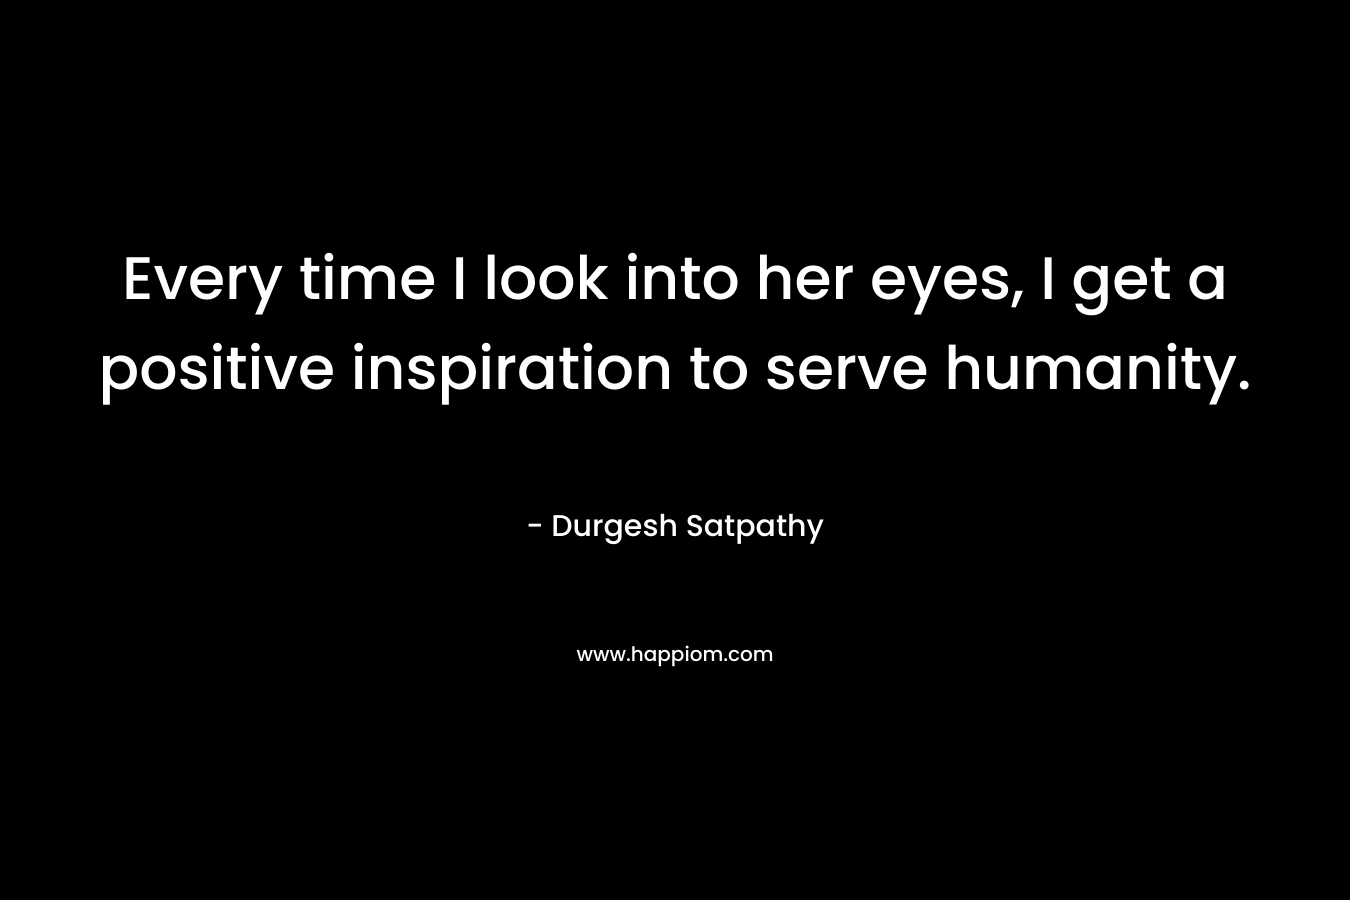 Every time I look into her eyes, I get a positive inspiration to serve humanity. – Durgesh Satpathy